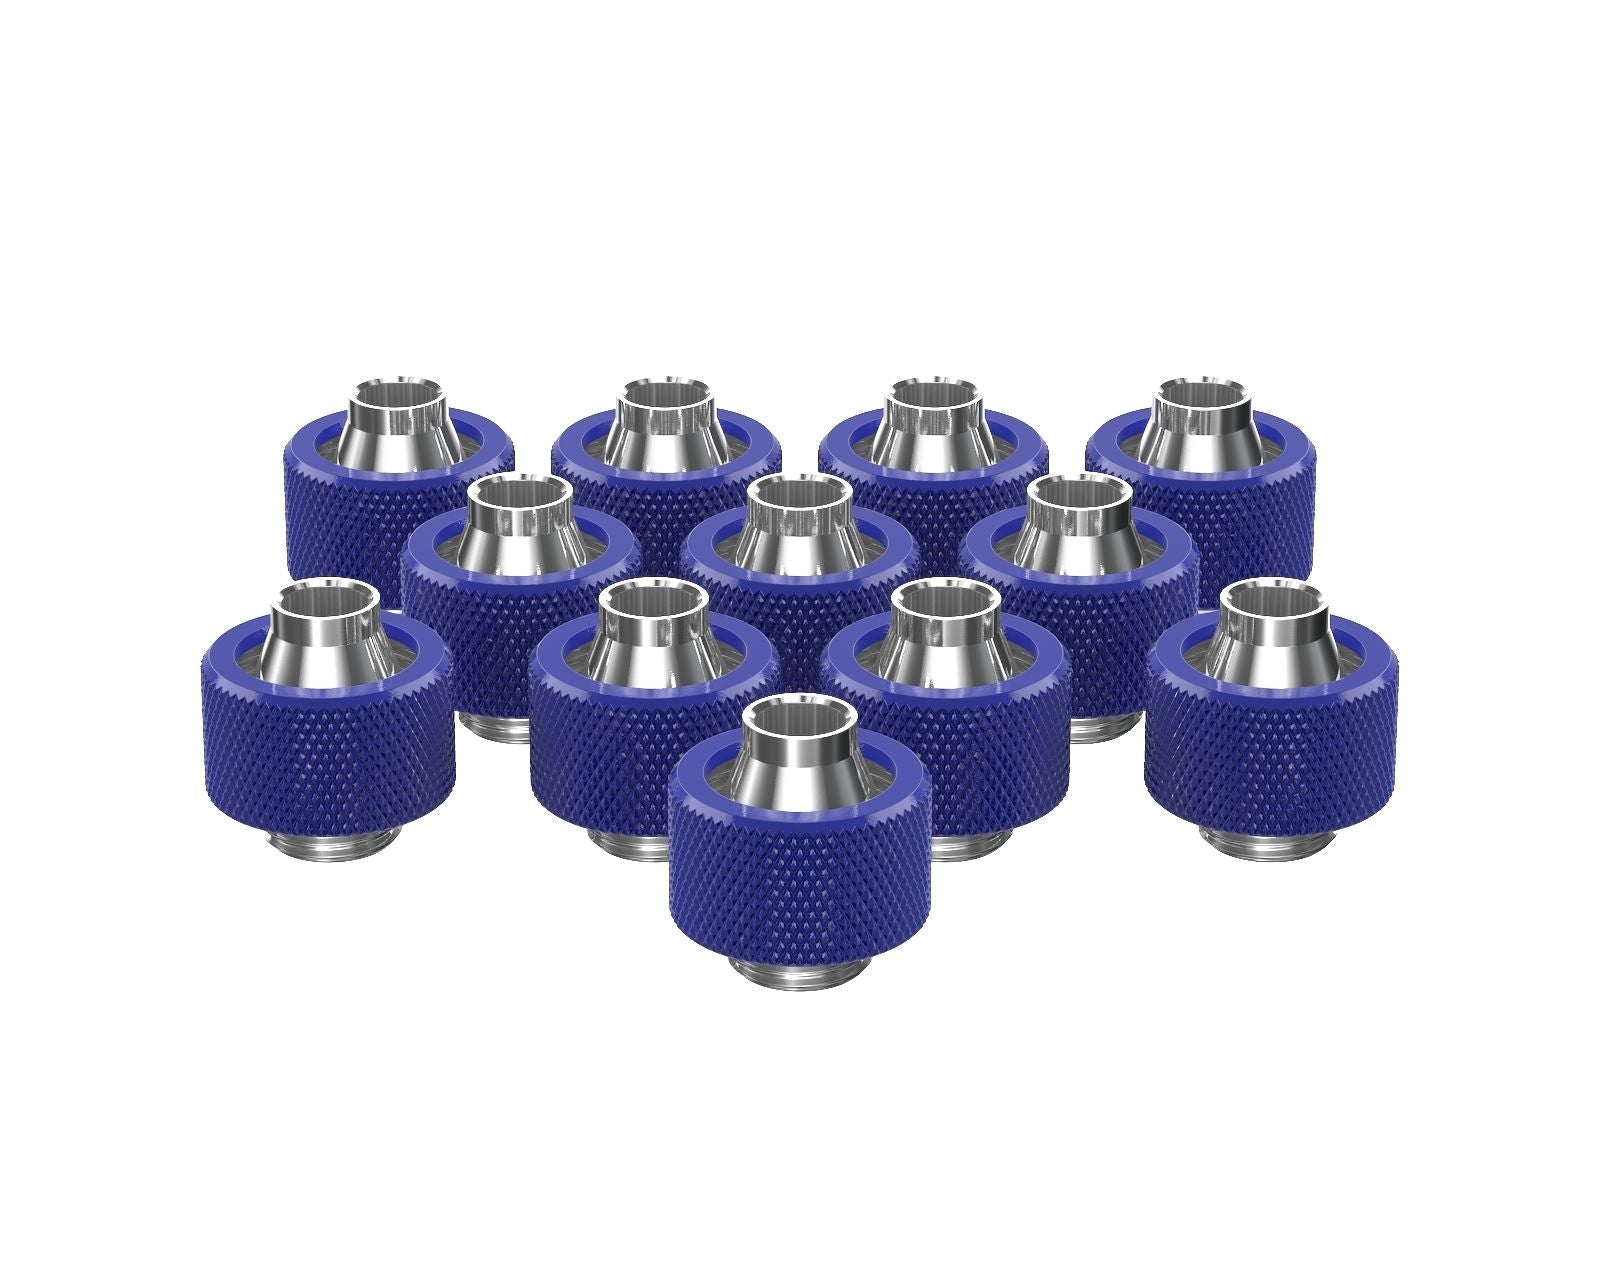 PrimoChill SecureFit SX - Premium Compression Fitting For 7/16in ID x 5/8in OD Flexible Tubing 12 Pack (F-SFSX758-12) - Available in 20+ Colors, Custom Watercooling Loop Ready - True Blue